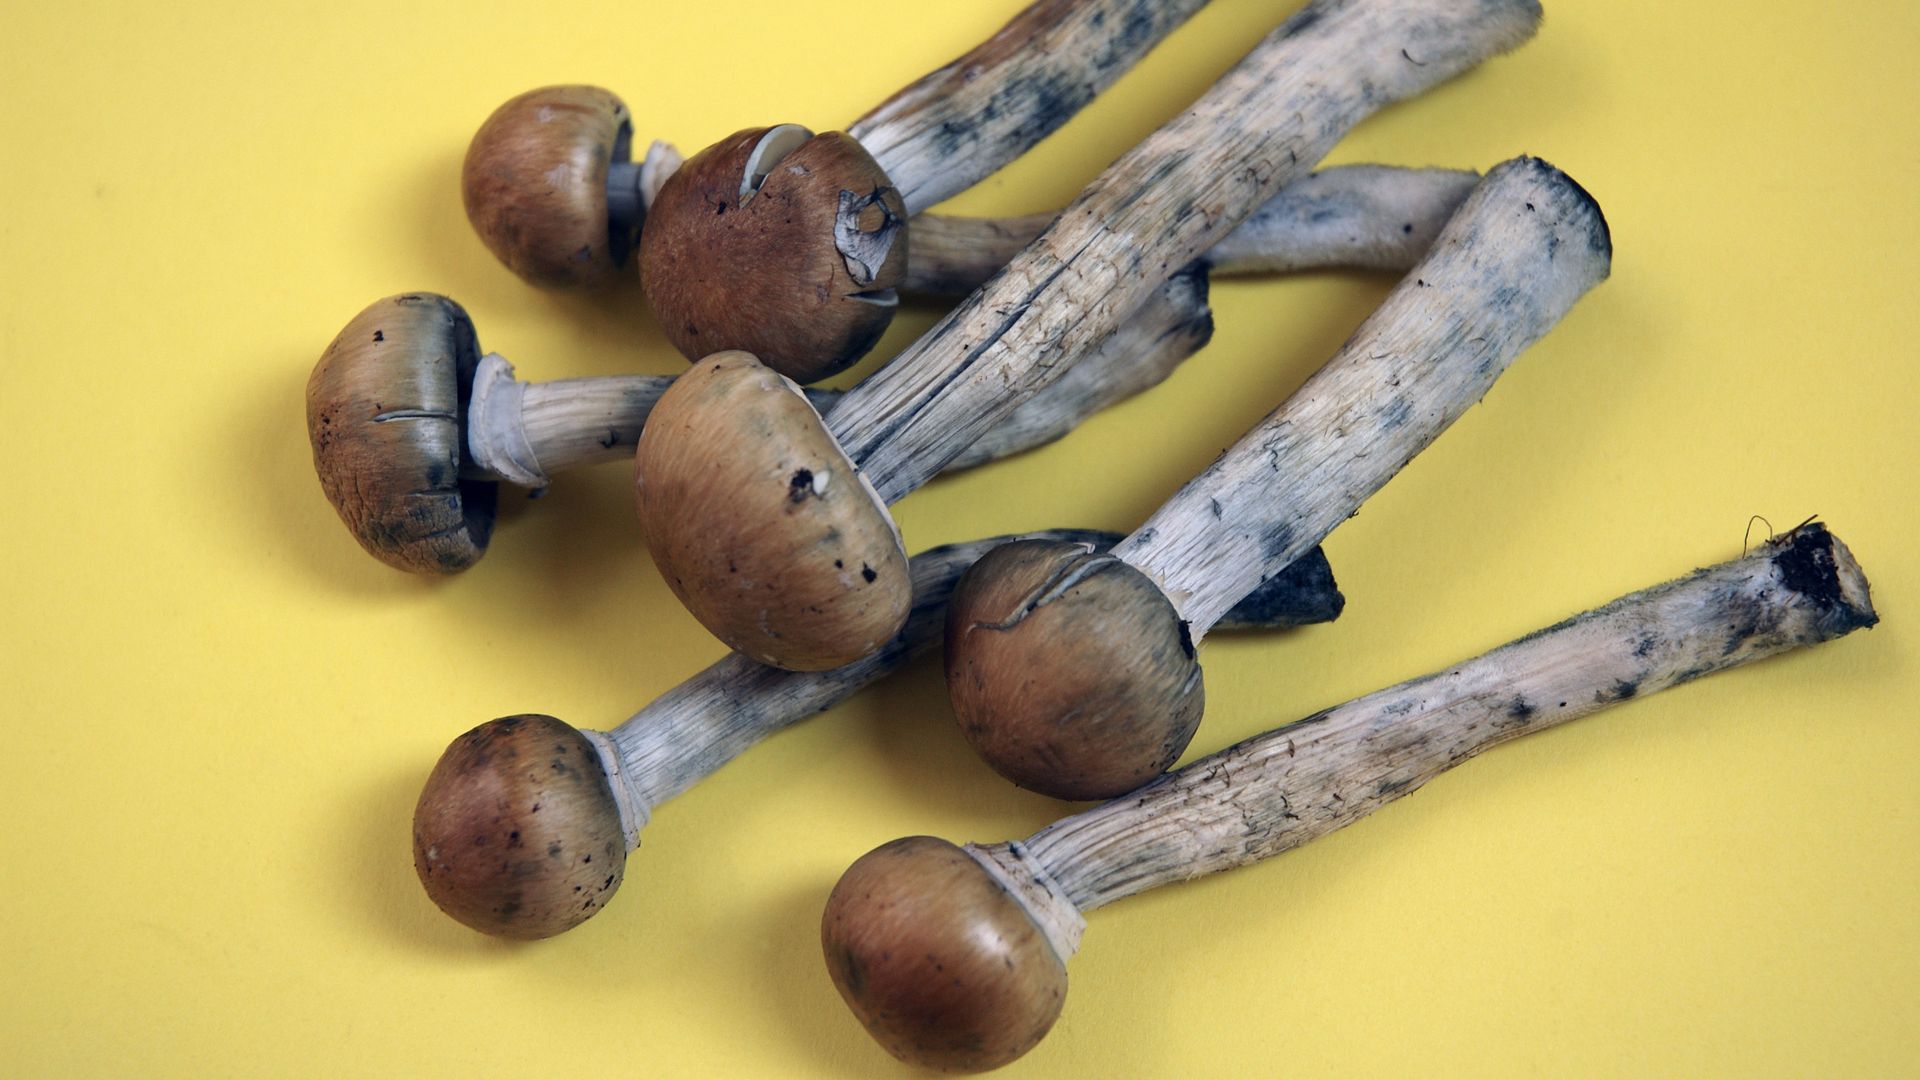 Psychedelic mushrooms